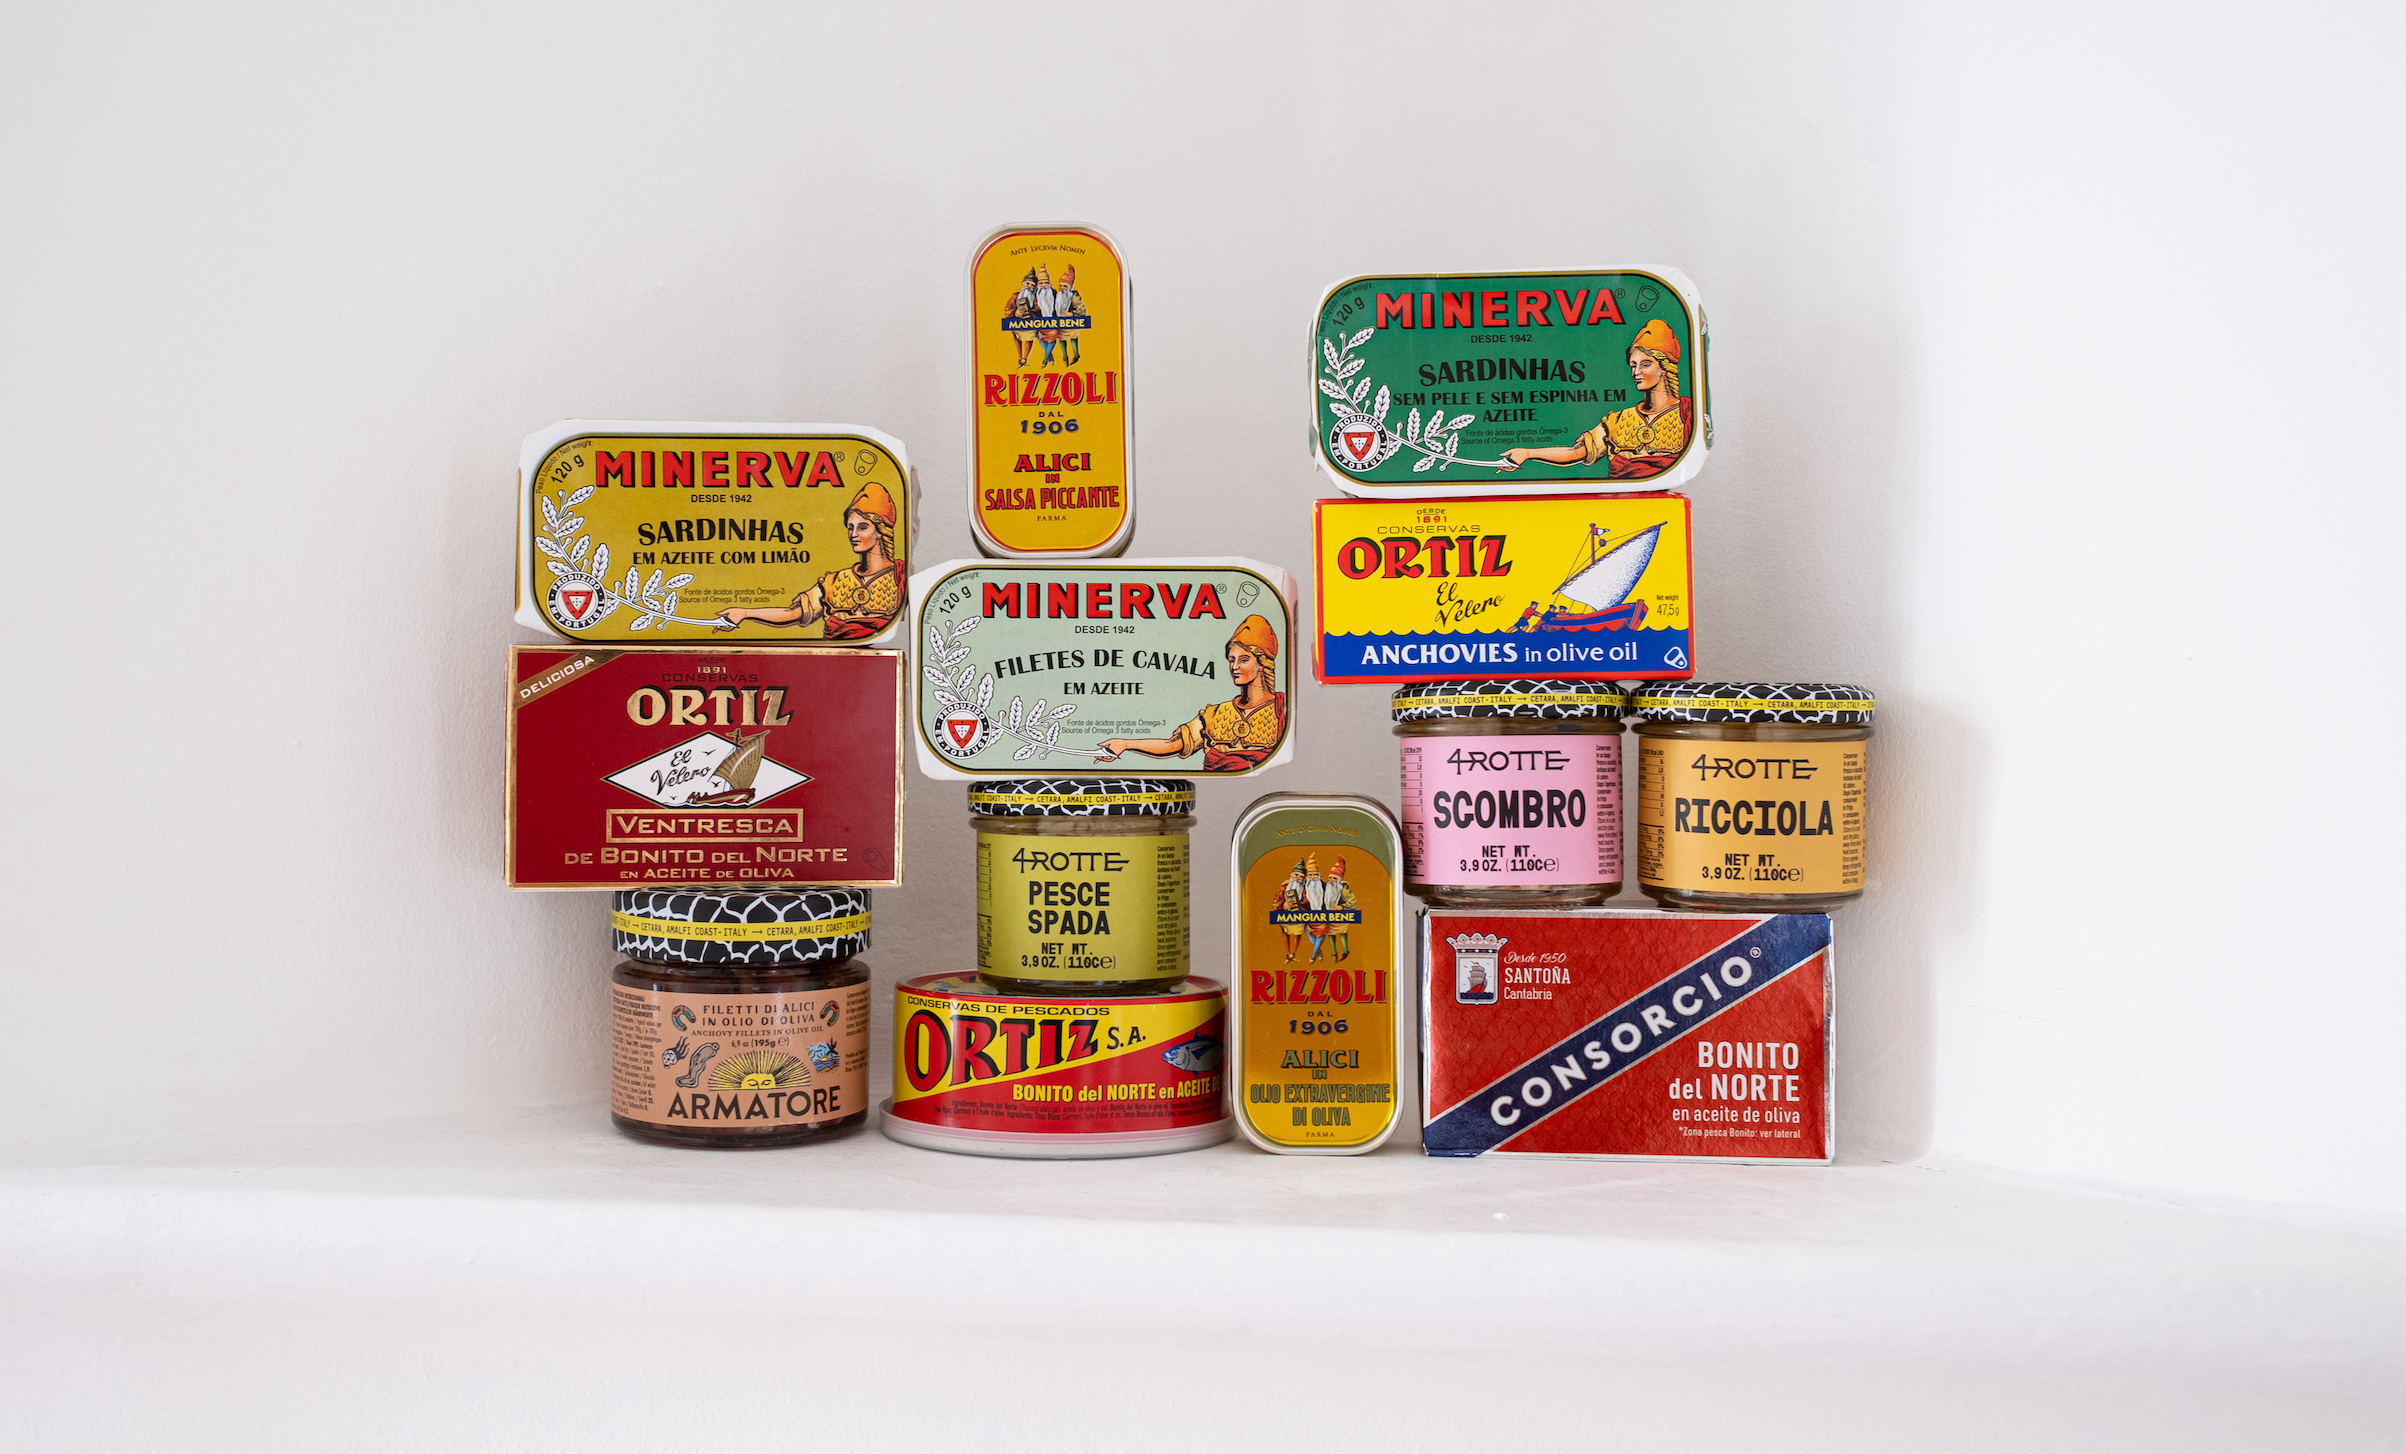 A selection of tinned fish from Spain, Portugal and Italy from Panzer's Deli